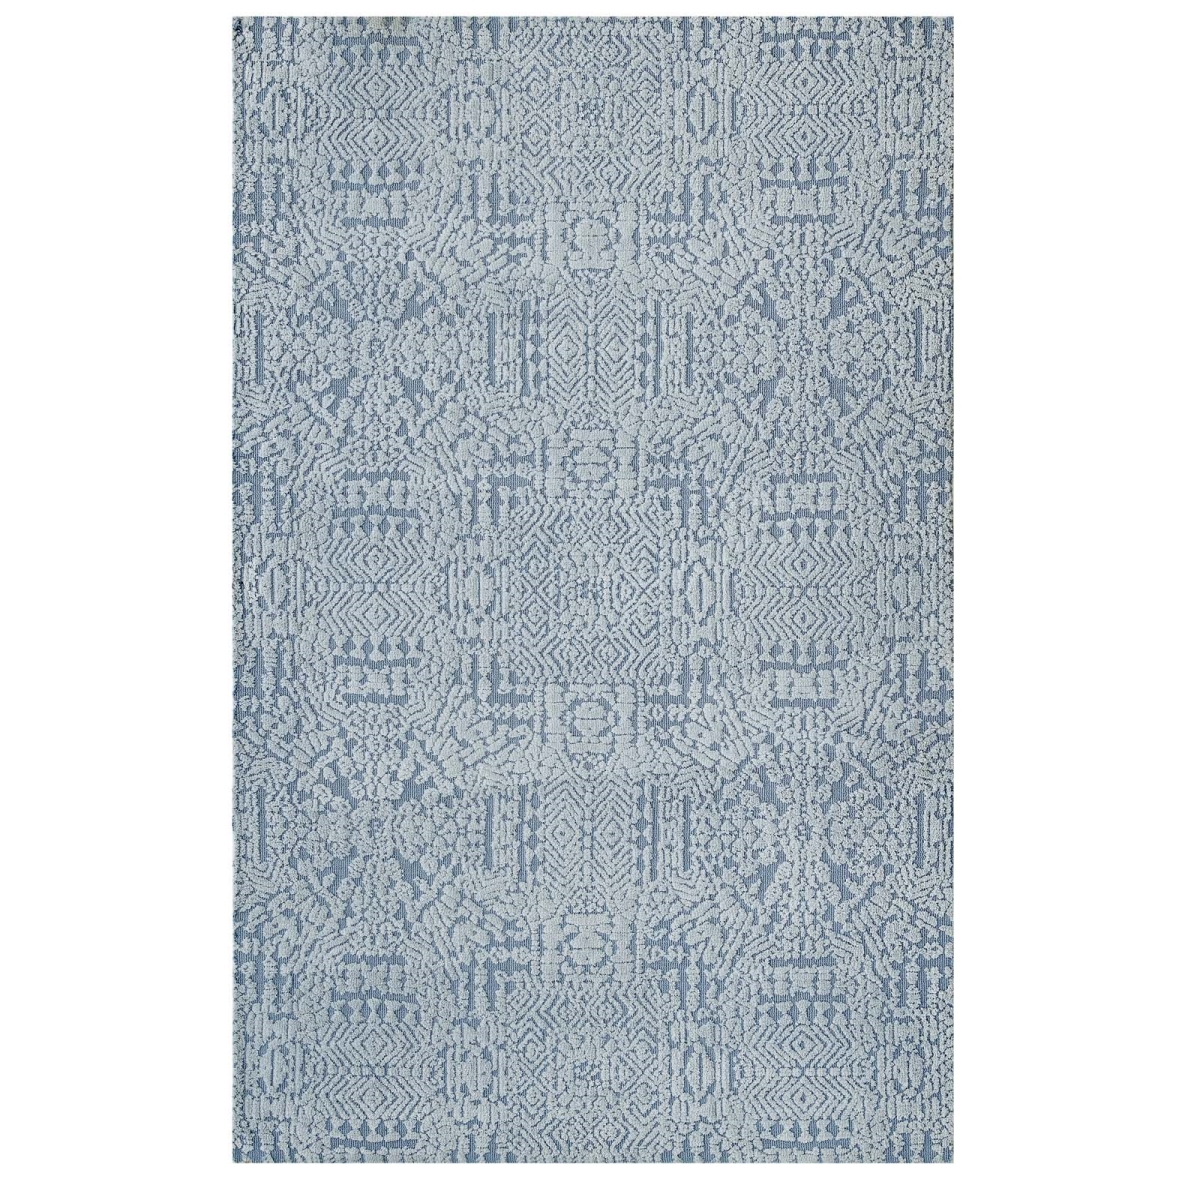 R-1018a-810 8 X 10 Ft. Javiera Contemporary Moroccan Polyester Area Rug - Ivory & Light Blue, 0.5 X 96 X 120 In.